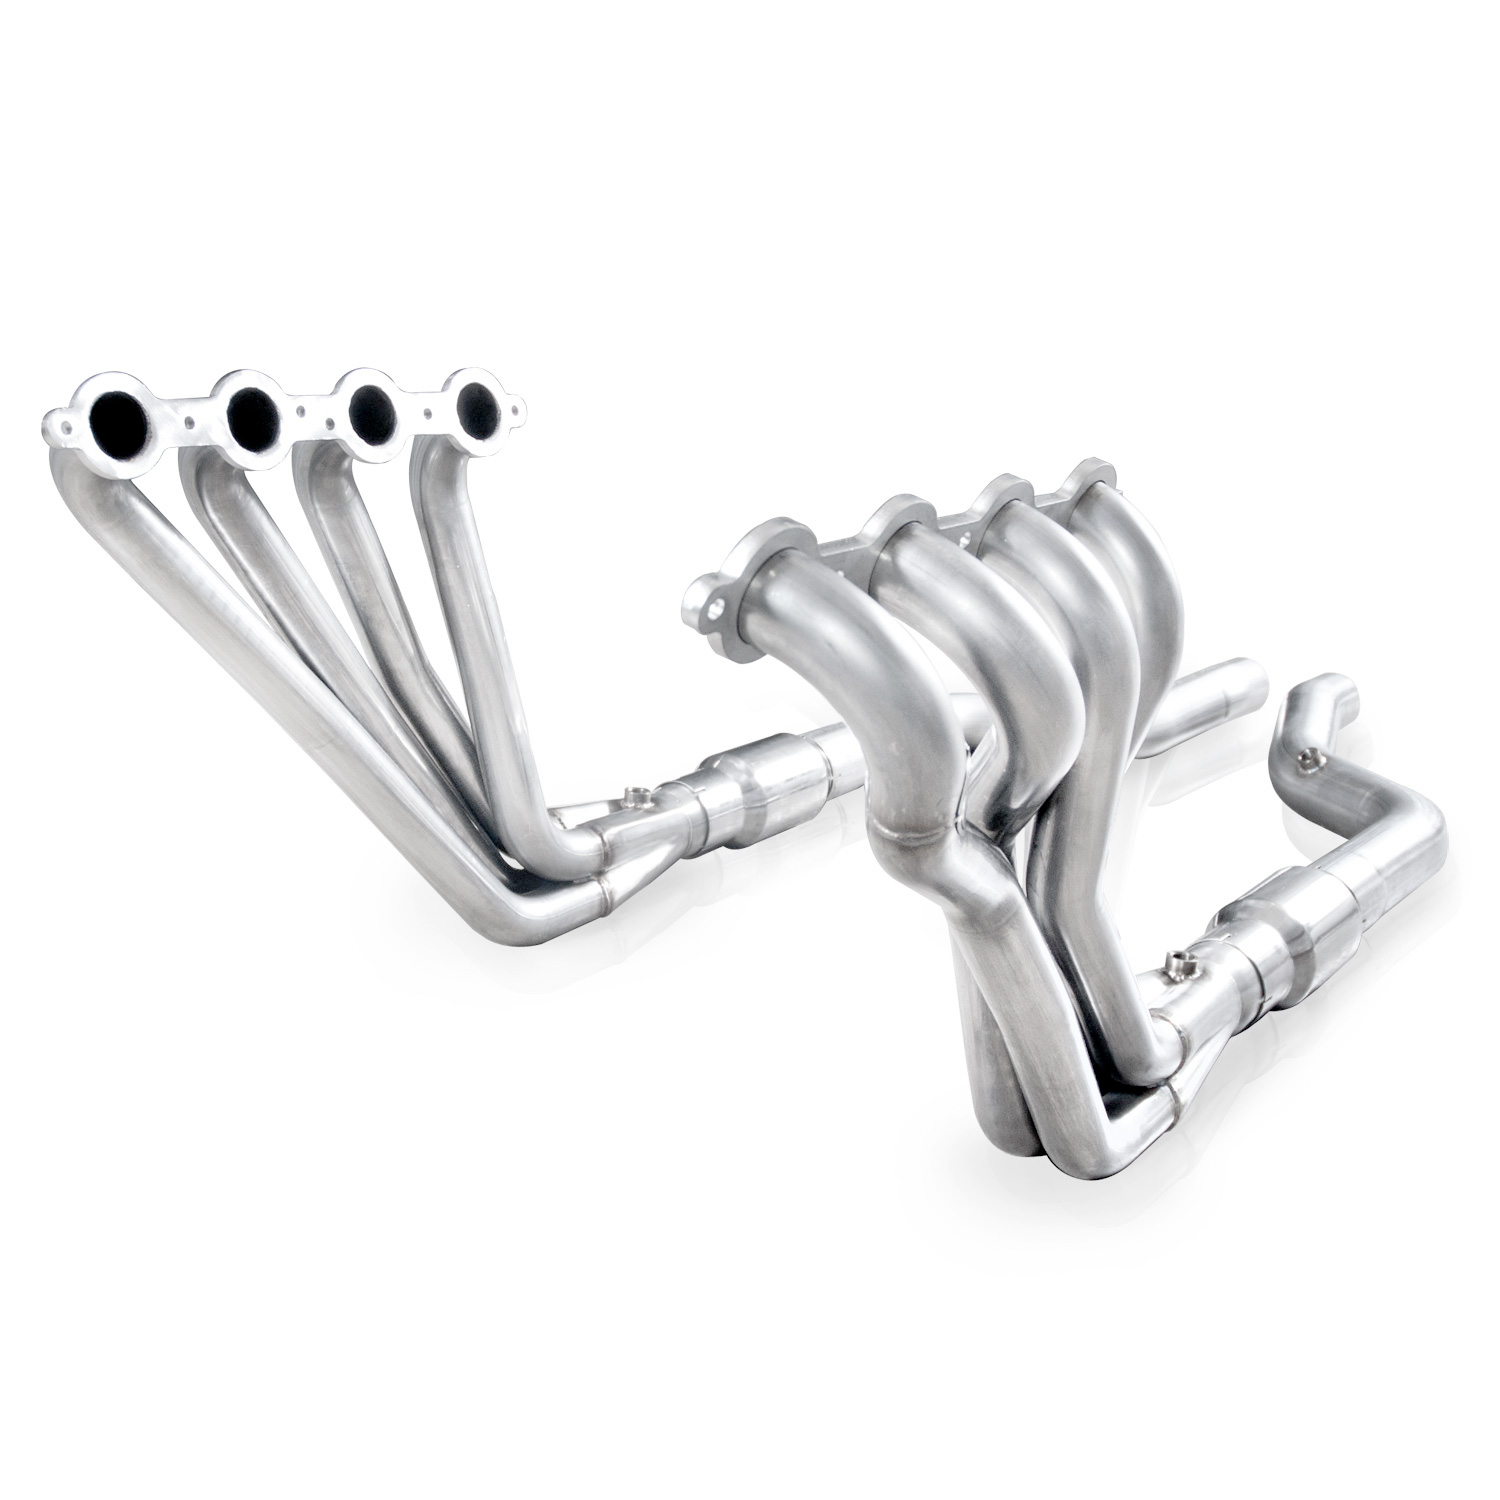 2010-2015 Camaro 6.2L SW Headers 2" With Catted Leads Performance Connect